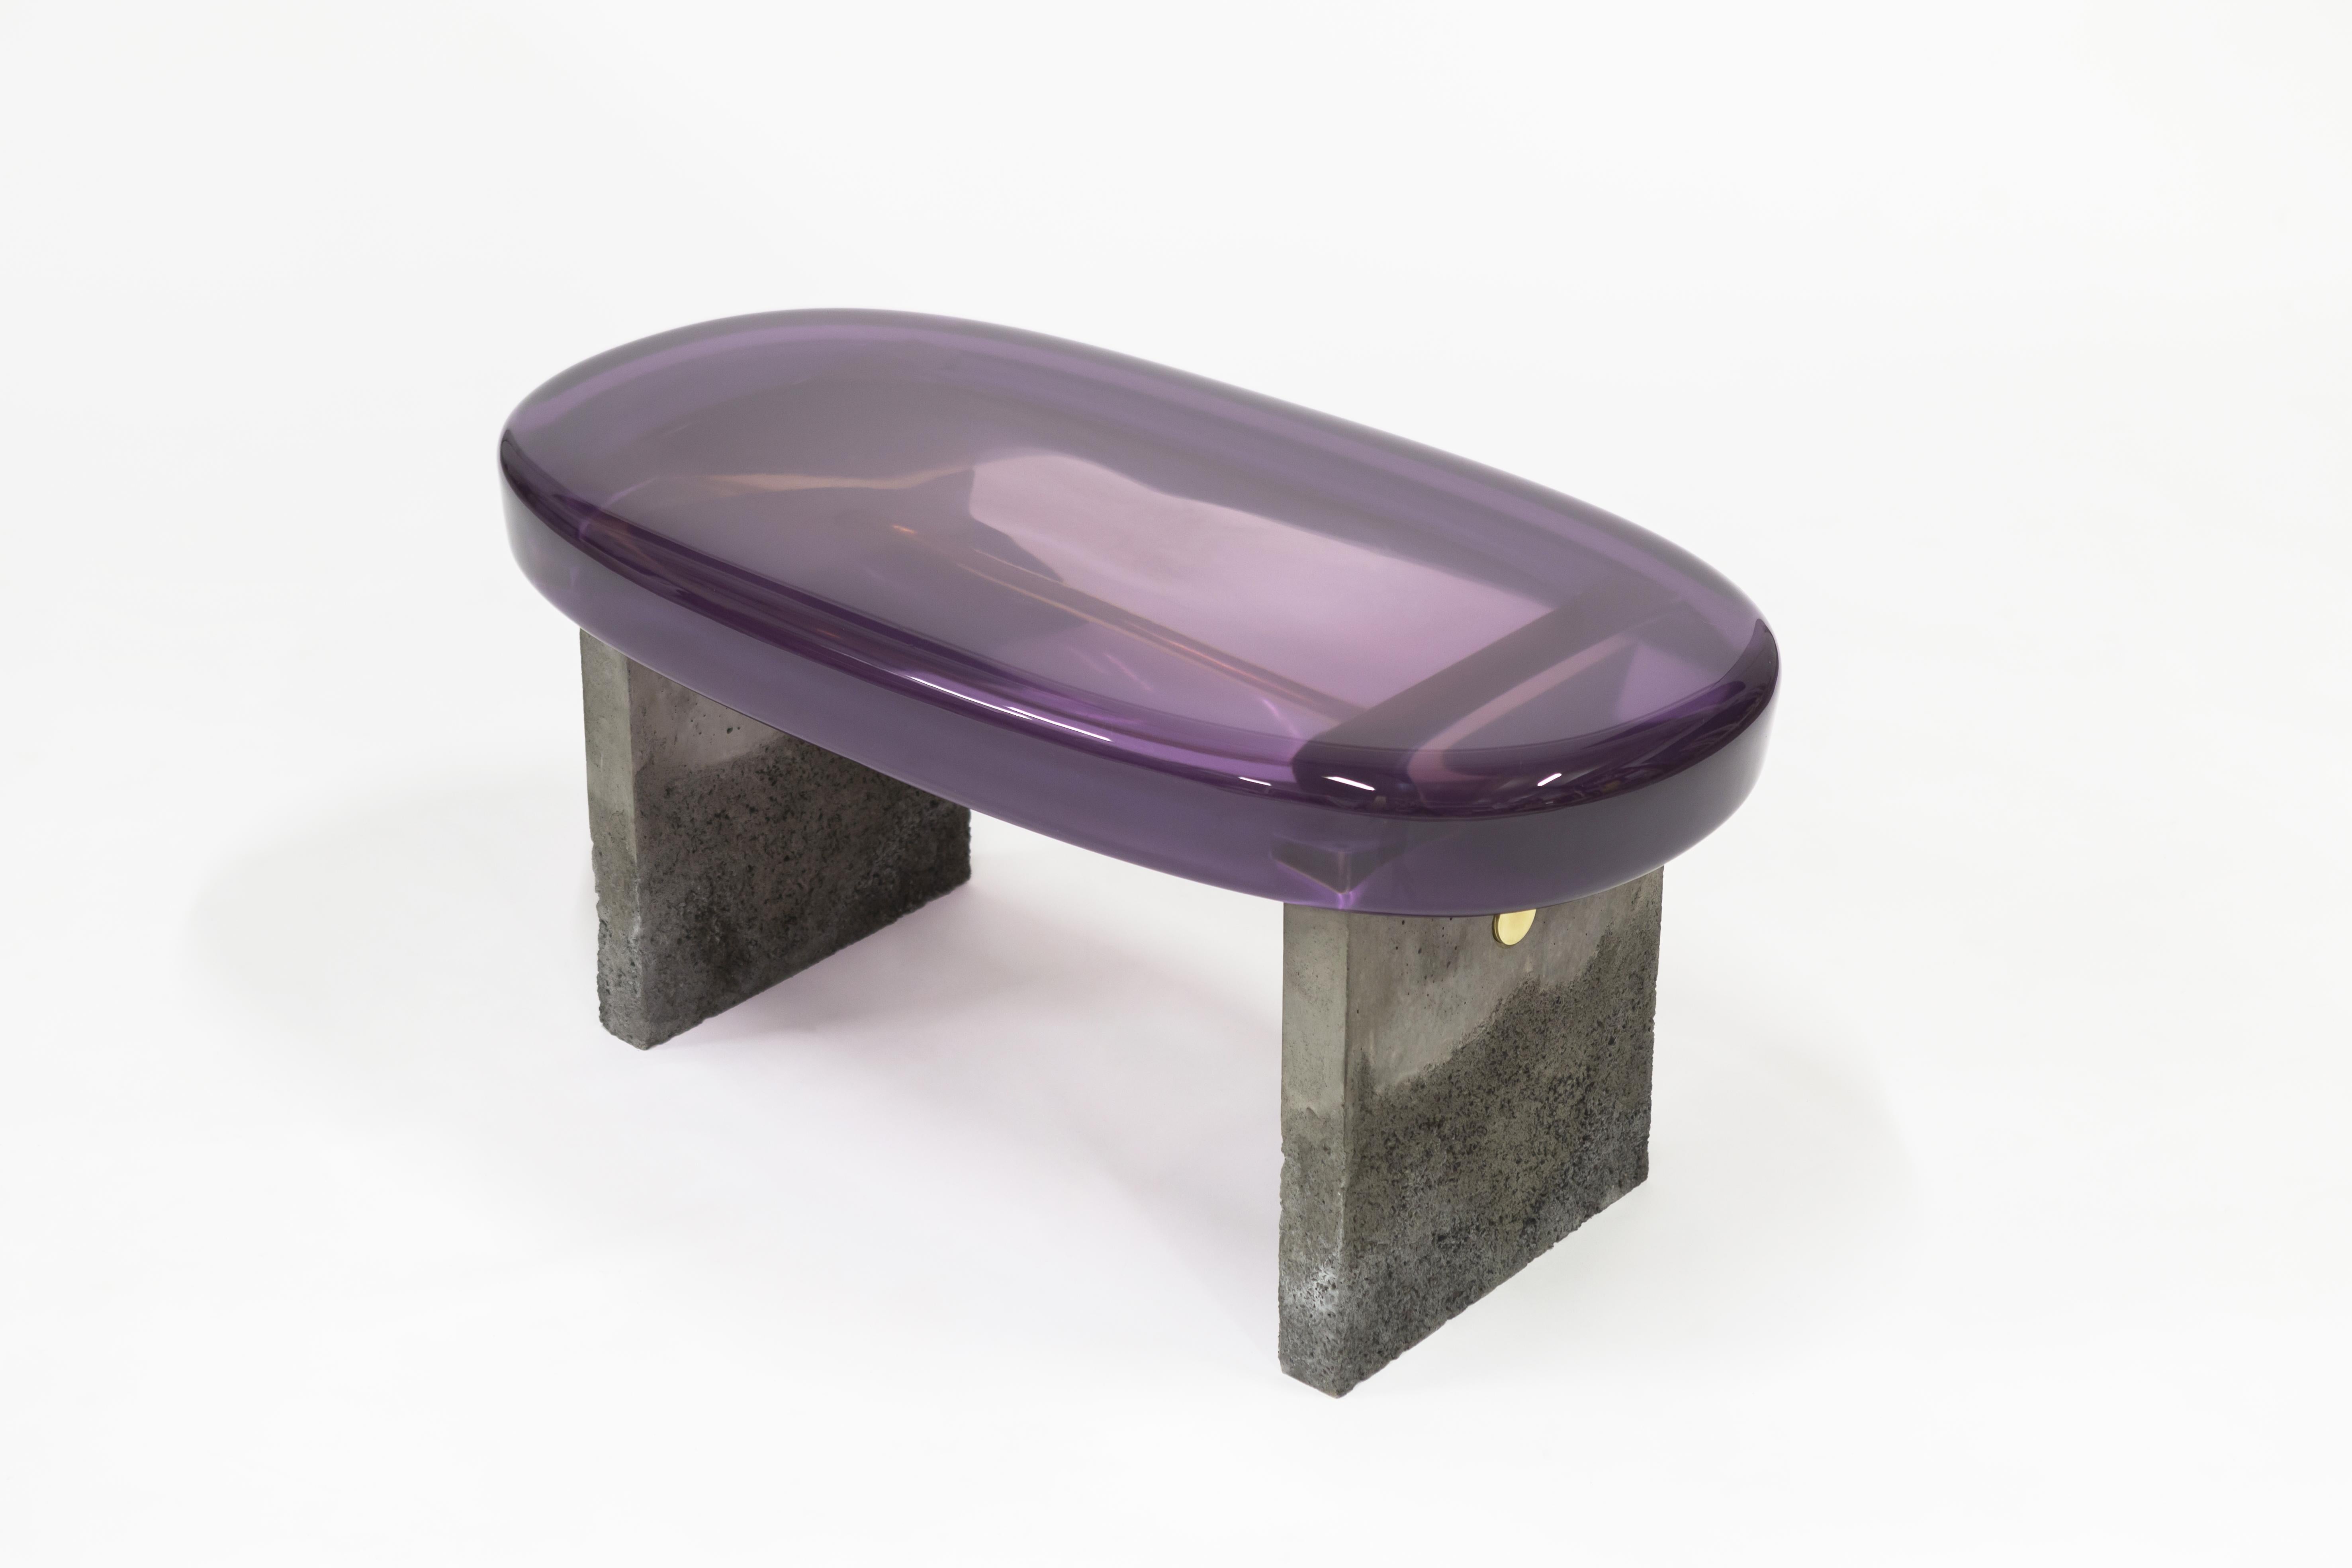 Golia Bench by Draga & Aurel
Dimensions: W 67 x D 33 x H 44 cm
 Top Ø 50 x 96 cm
Materials: Resin top, Concrete

The GOLIA benches are featured by sculptural, almost monumental forms, and by an unusual combination of material: The raw, solid